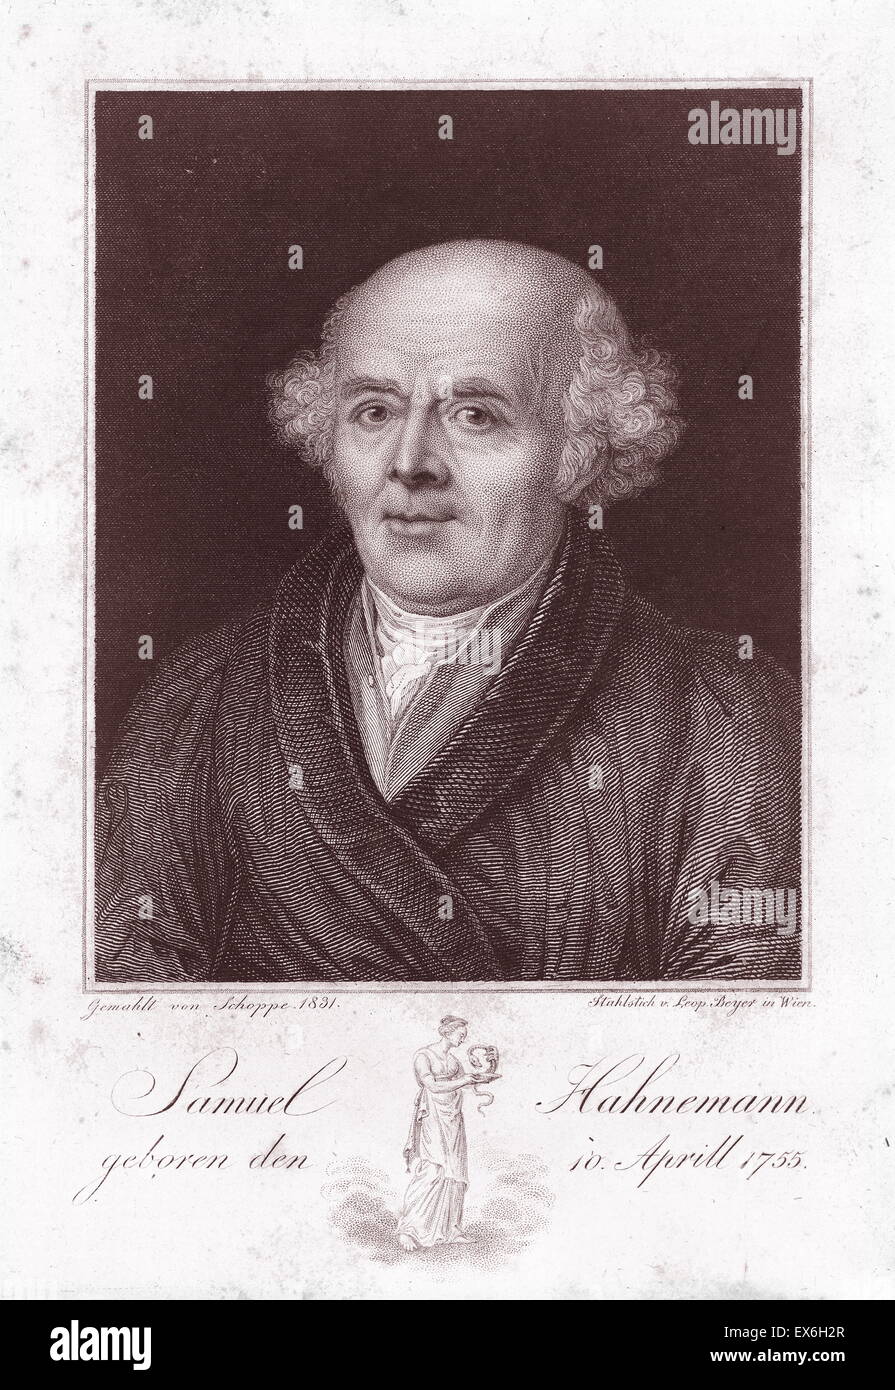 Samuel Hahnemann (1755-1843) who was a German physician and the founder of Homeopathy. Dated 1820 Stock Photo